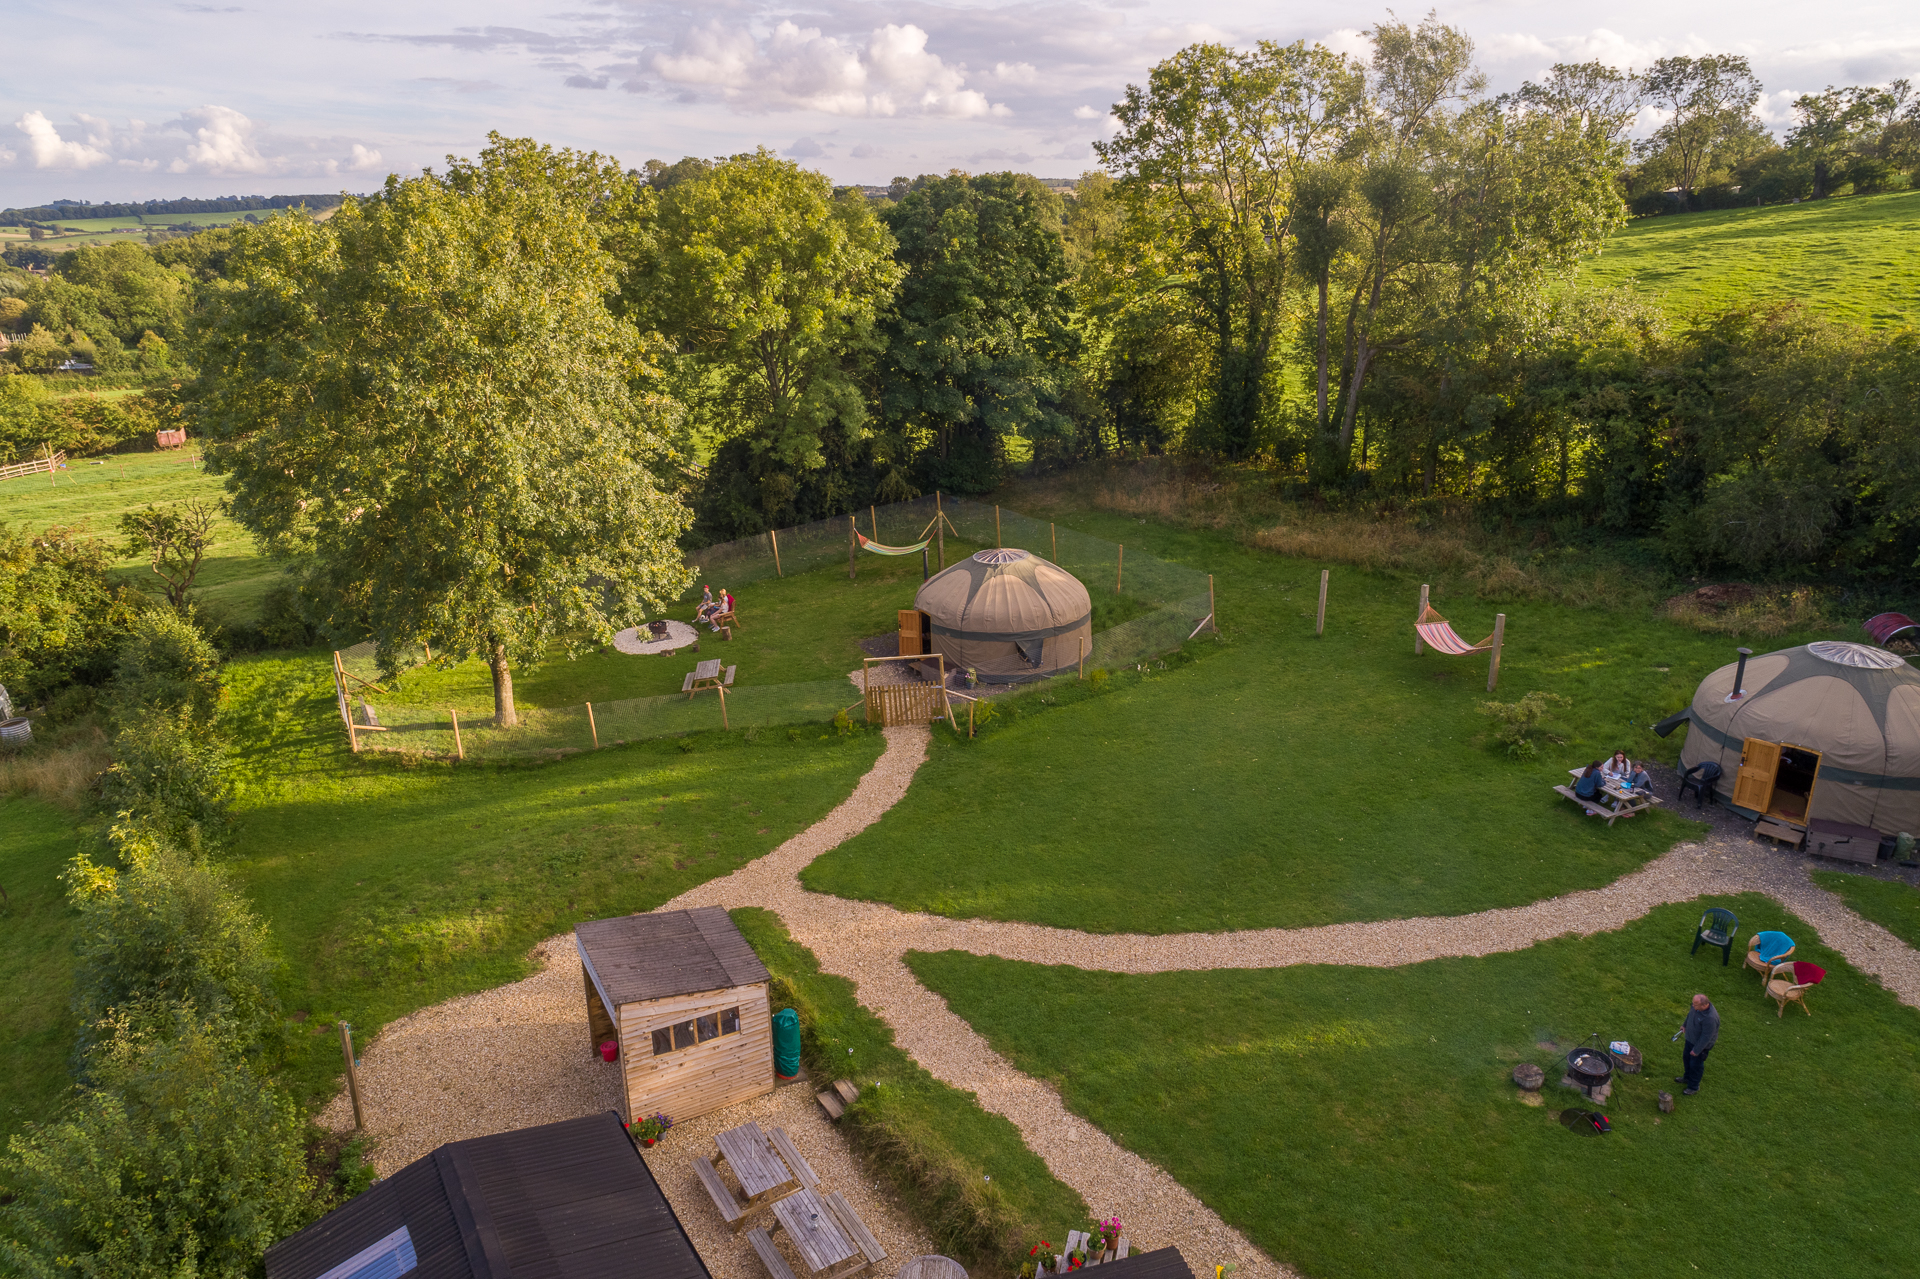 Aerial view of 2 yurts and grounds